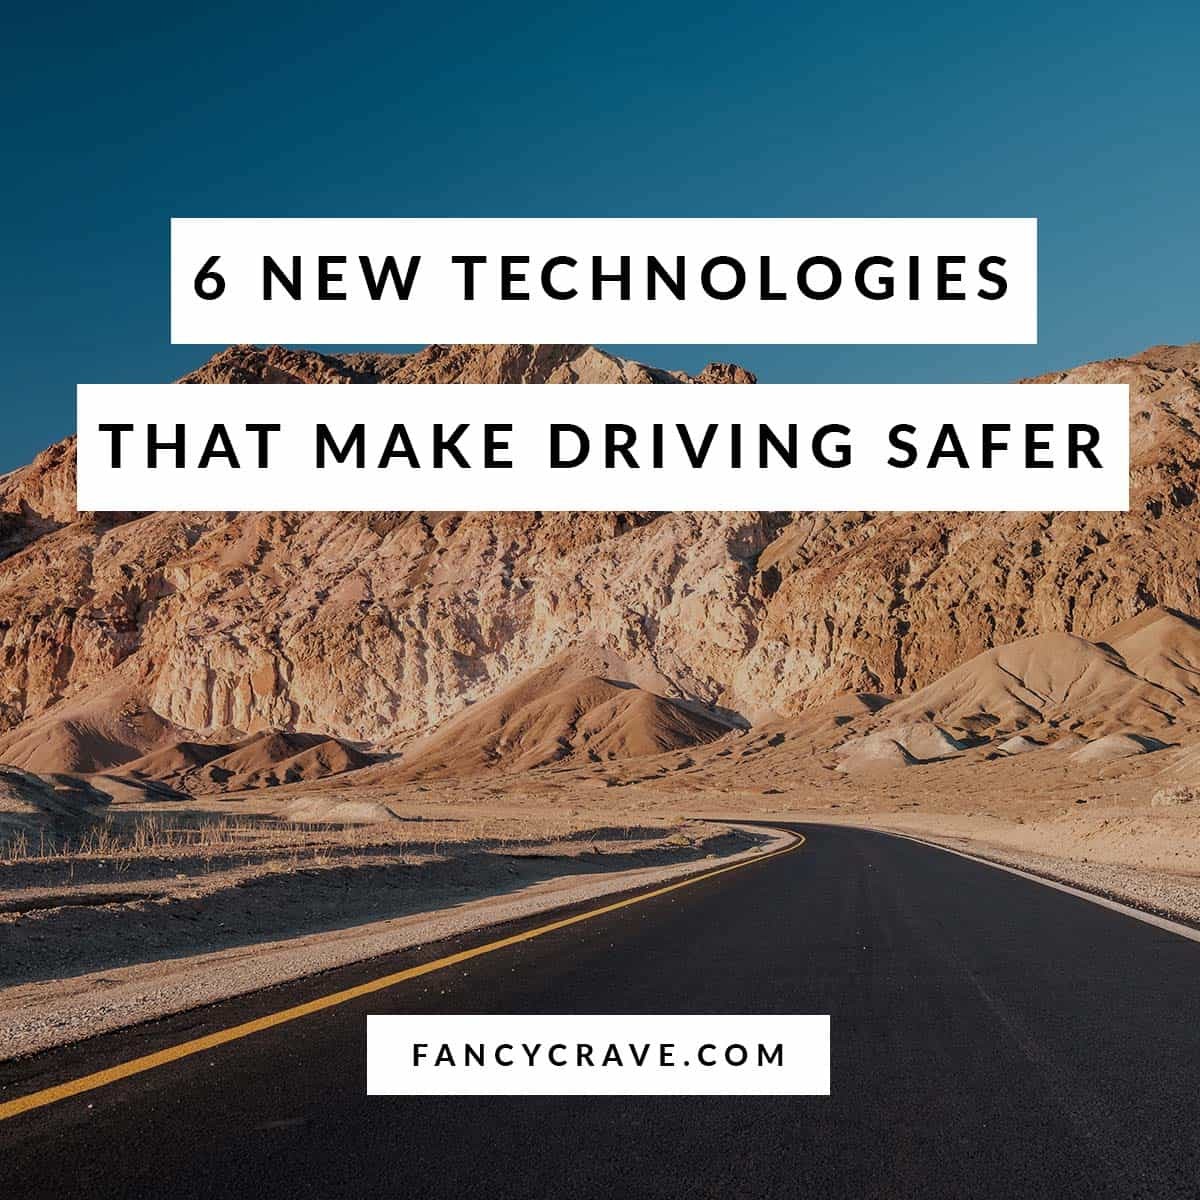 New Technologies that Make Driving Safer